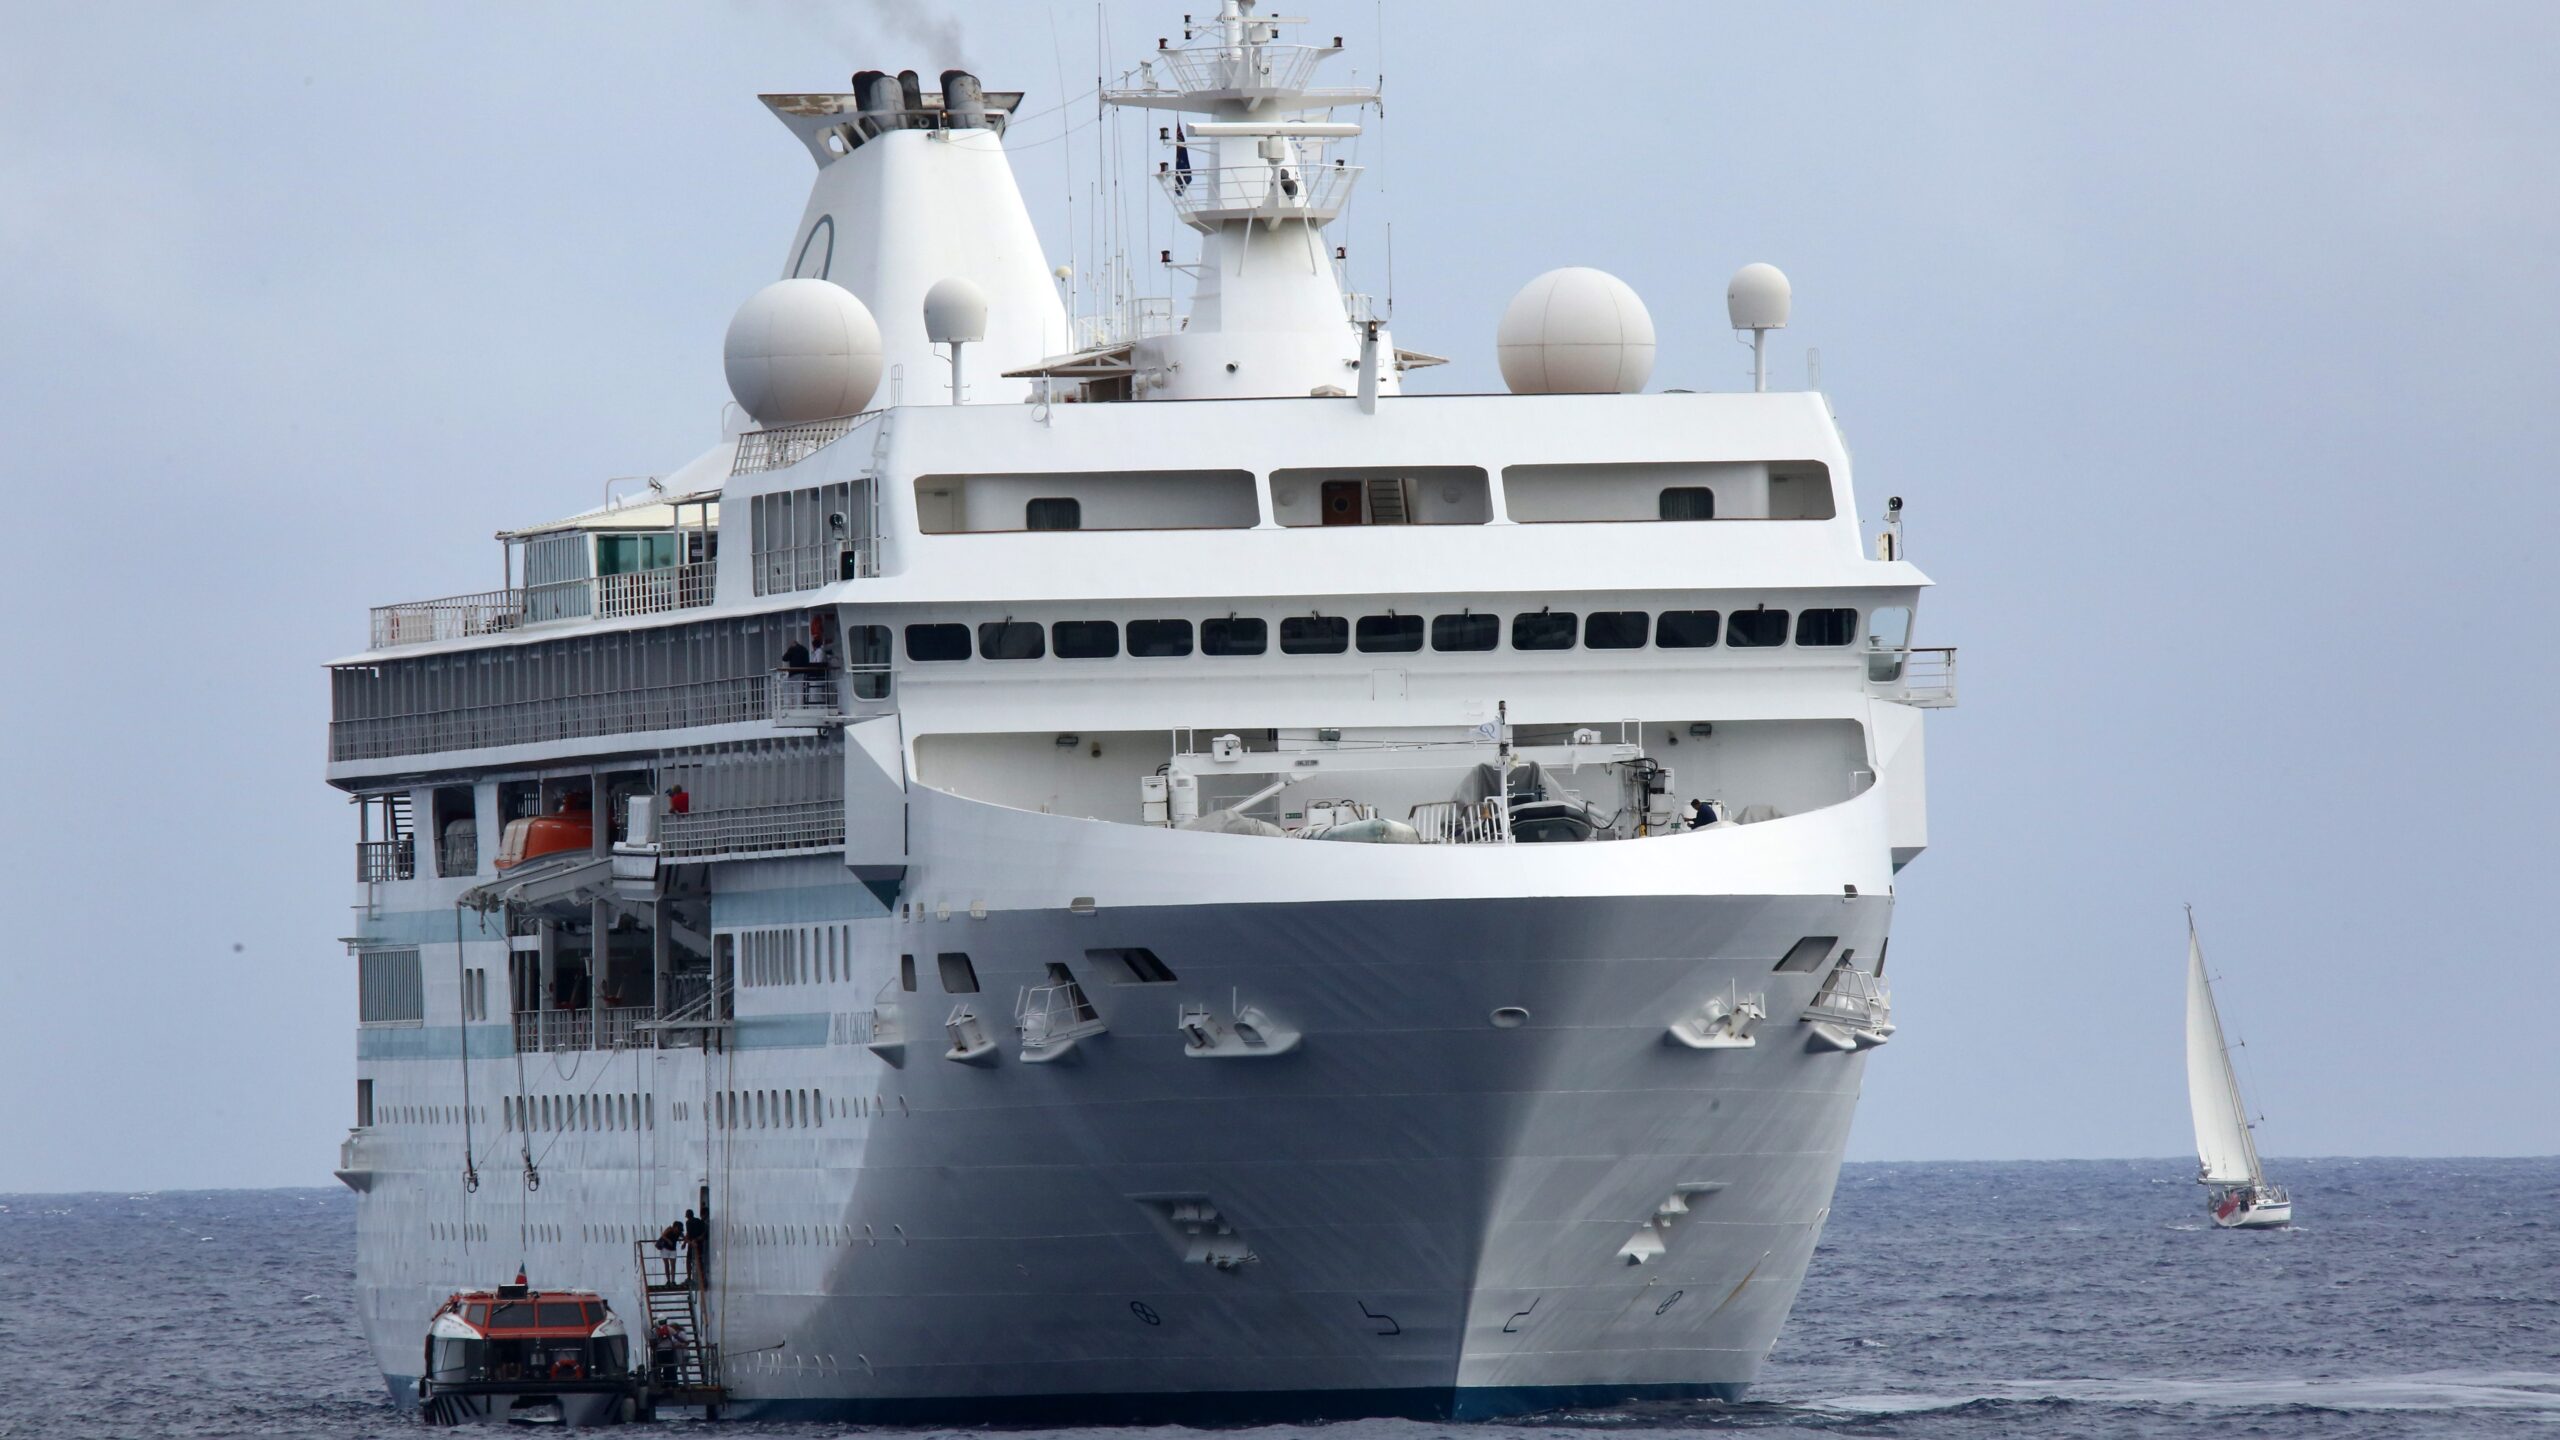 Cruise tourism faces challenges despite removal of travel restrictions